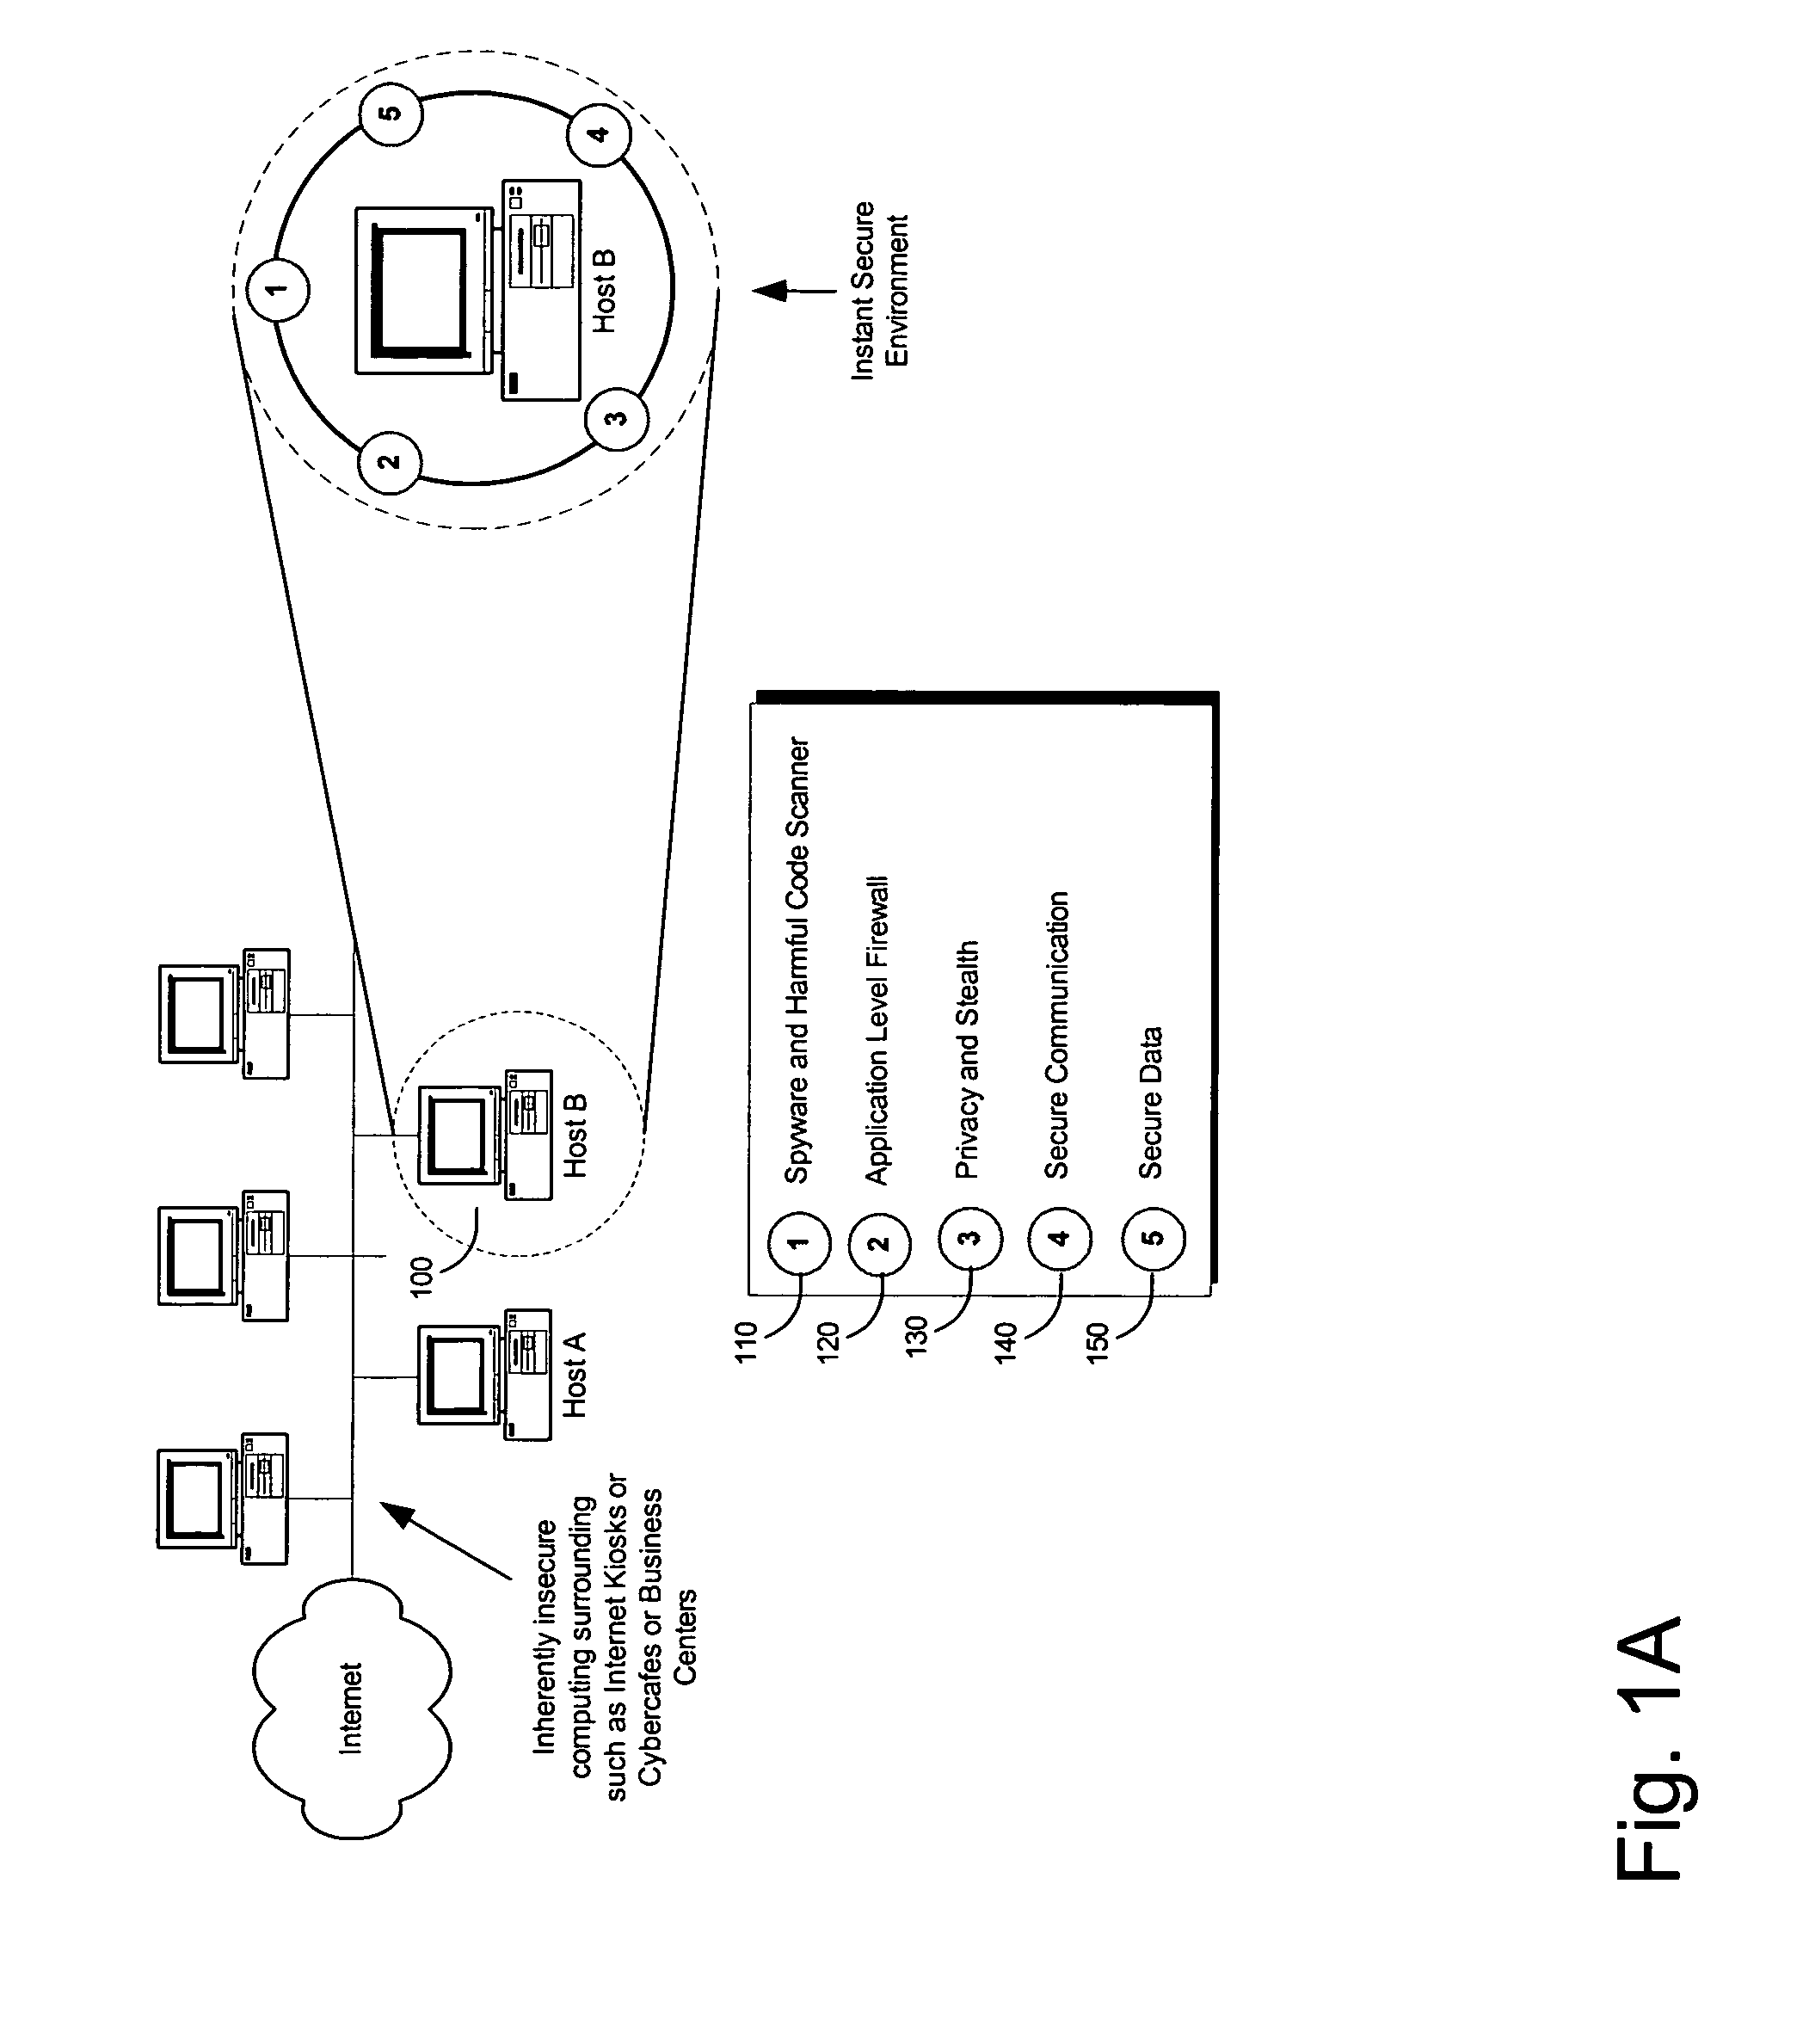 Method and apparatus for creating a secure anywhere system